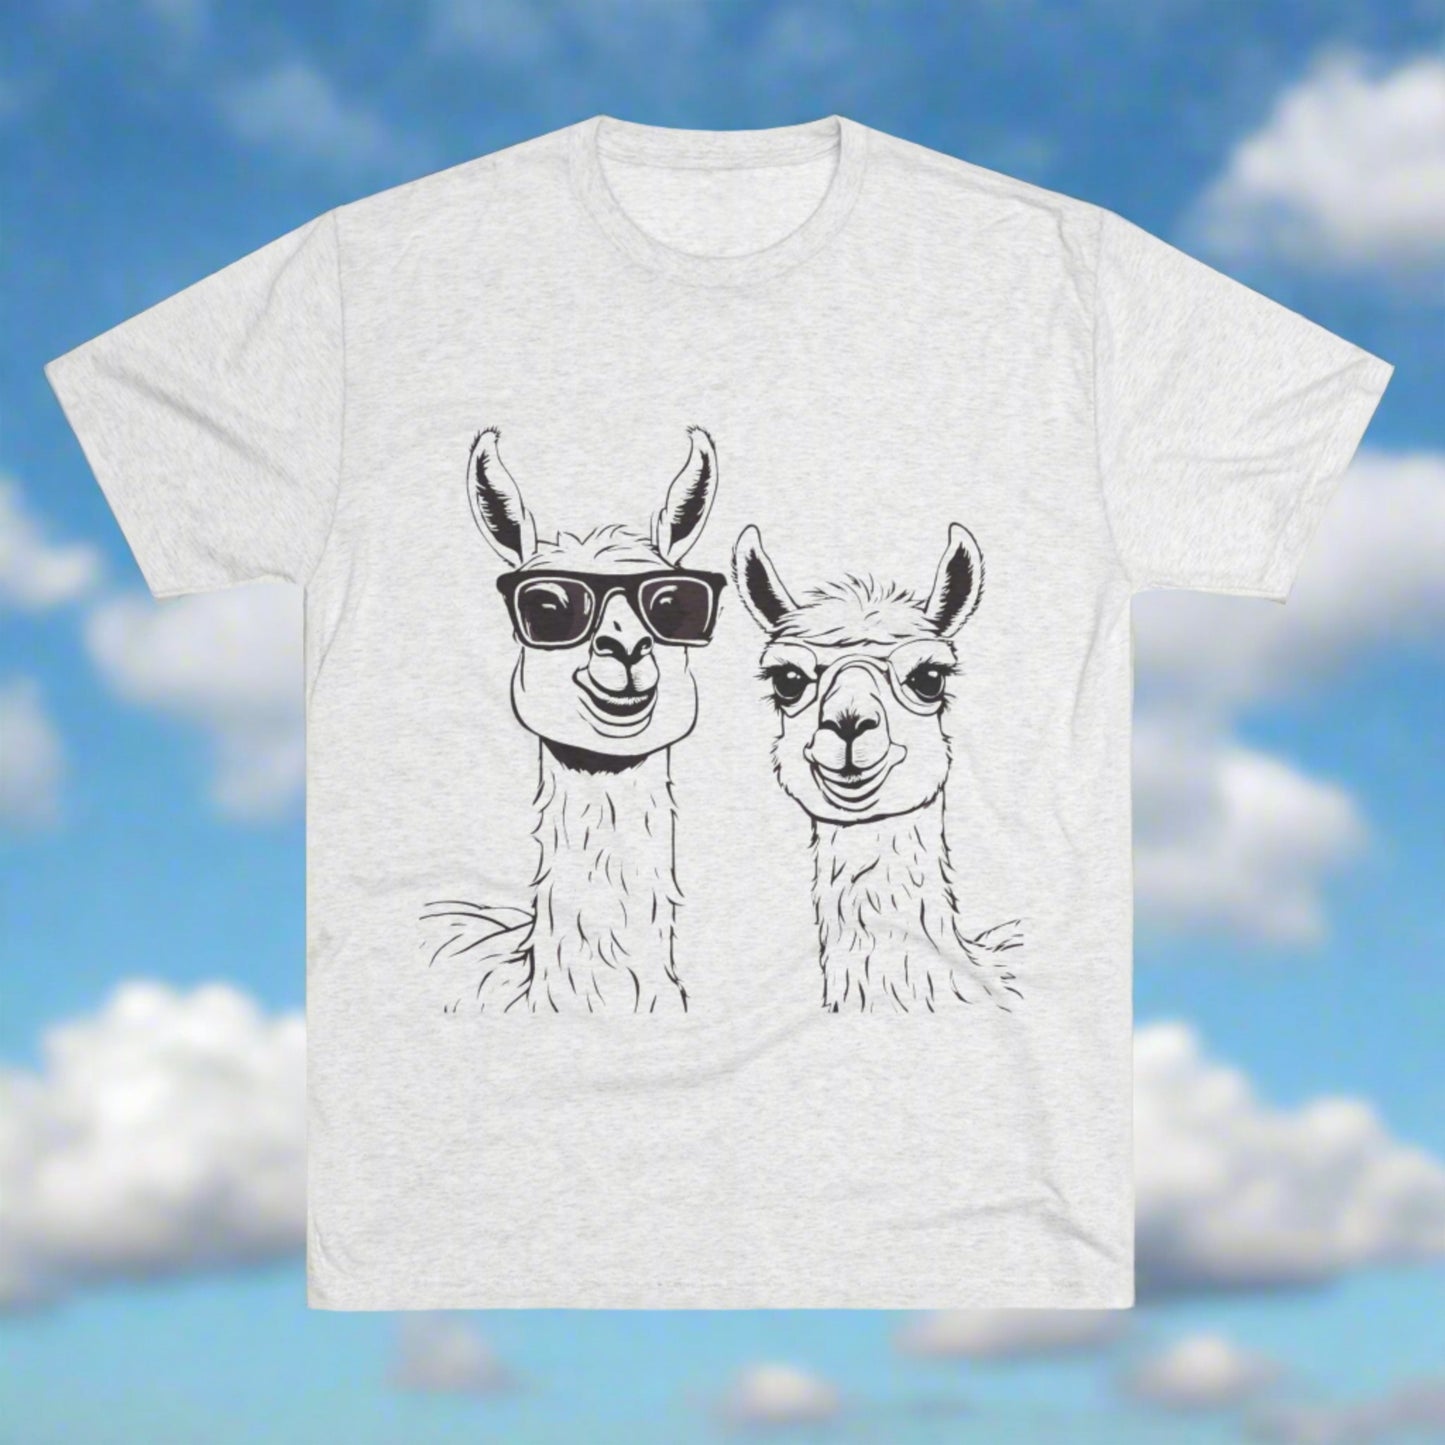 The Printify Llamas - Tri-Blend Crew Tee - Unisex Fit is a light gray t-shirt featuring a black and white illustration of two llamas. One llama is wearing sunglasses while the other is not. Both llamas, facing forward with content expressions, are printed on this premium blend fabric for ultimate comfort and style.